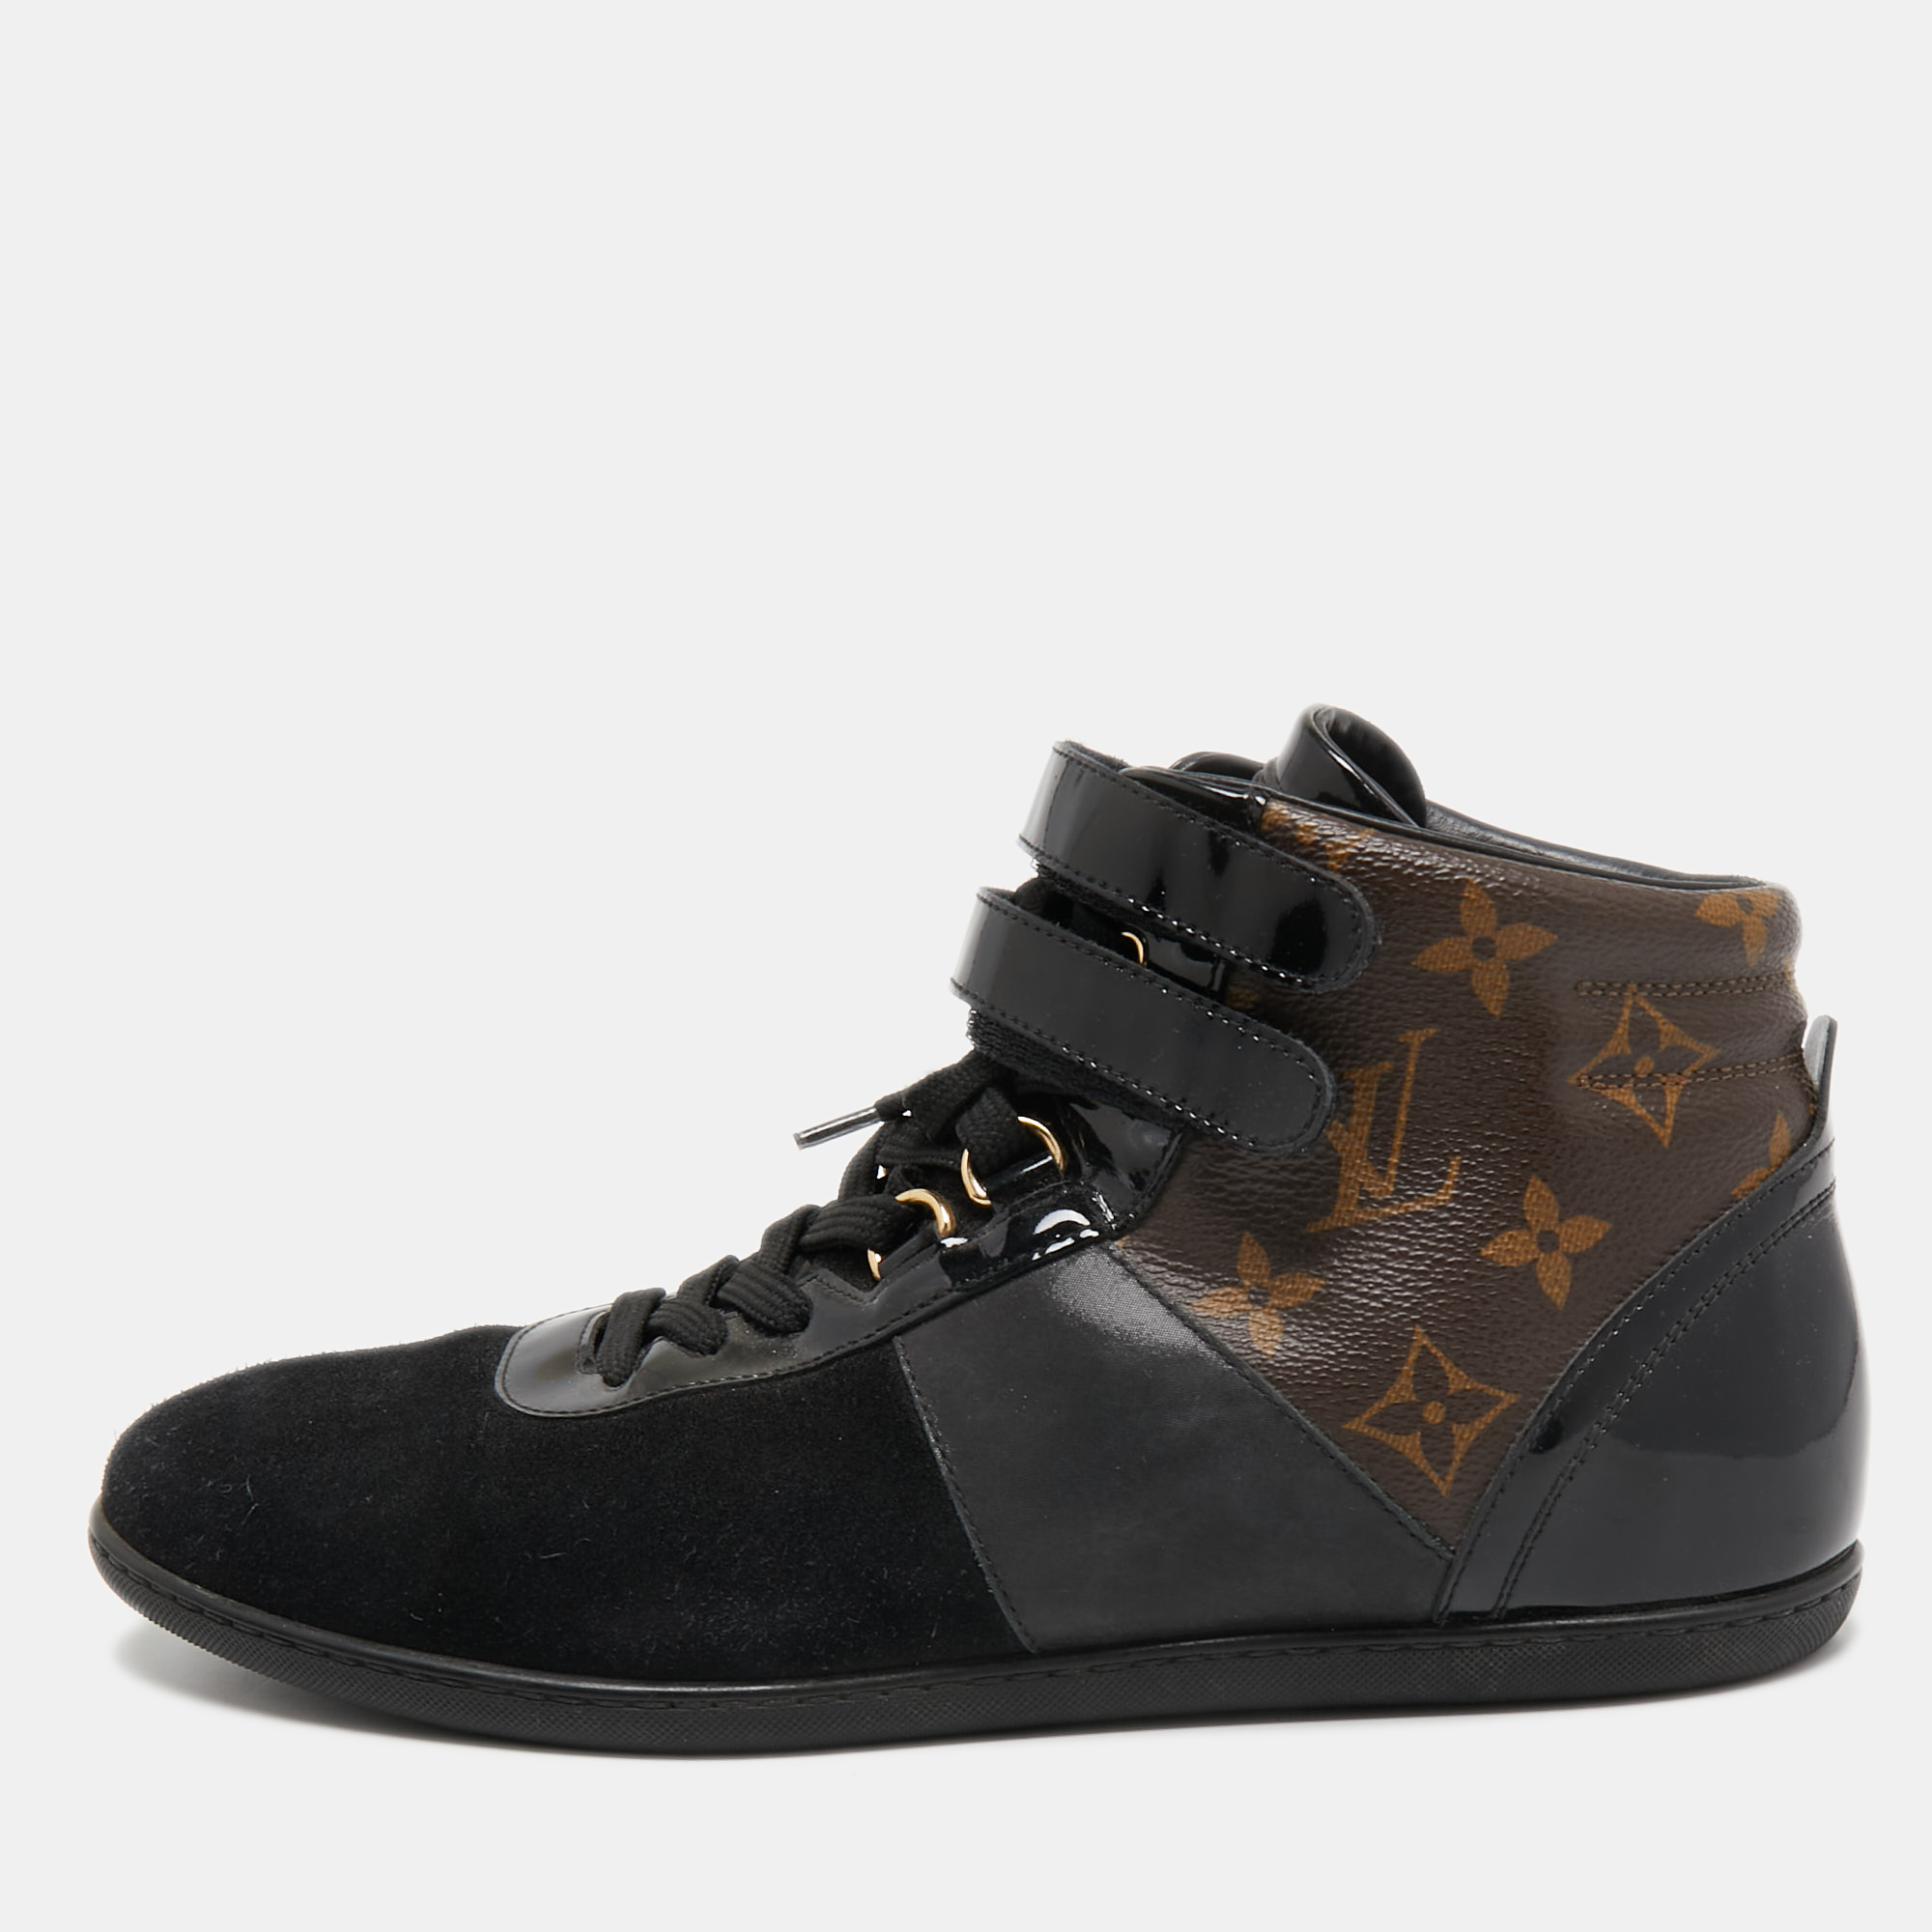 Louis Vuitton Brown Patent Leather And Monogram Canvas Lace Up Sneakers  Size 38.5 Louis Vuitton